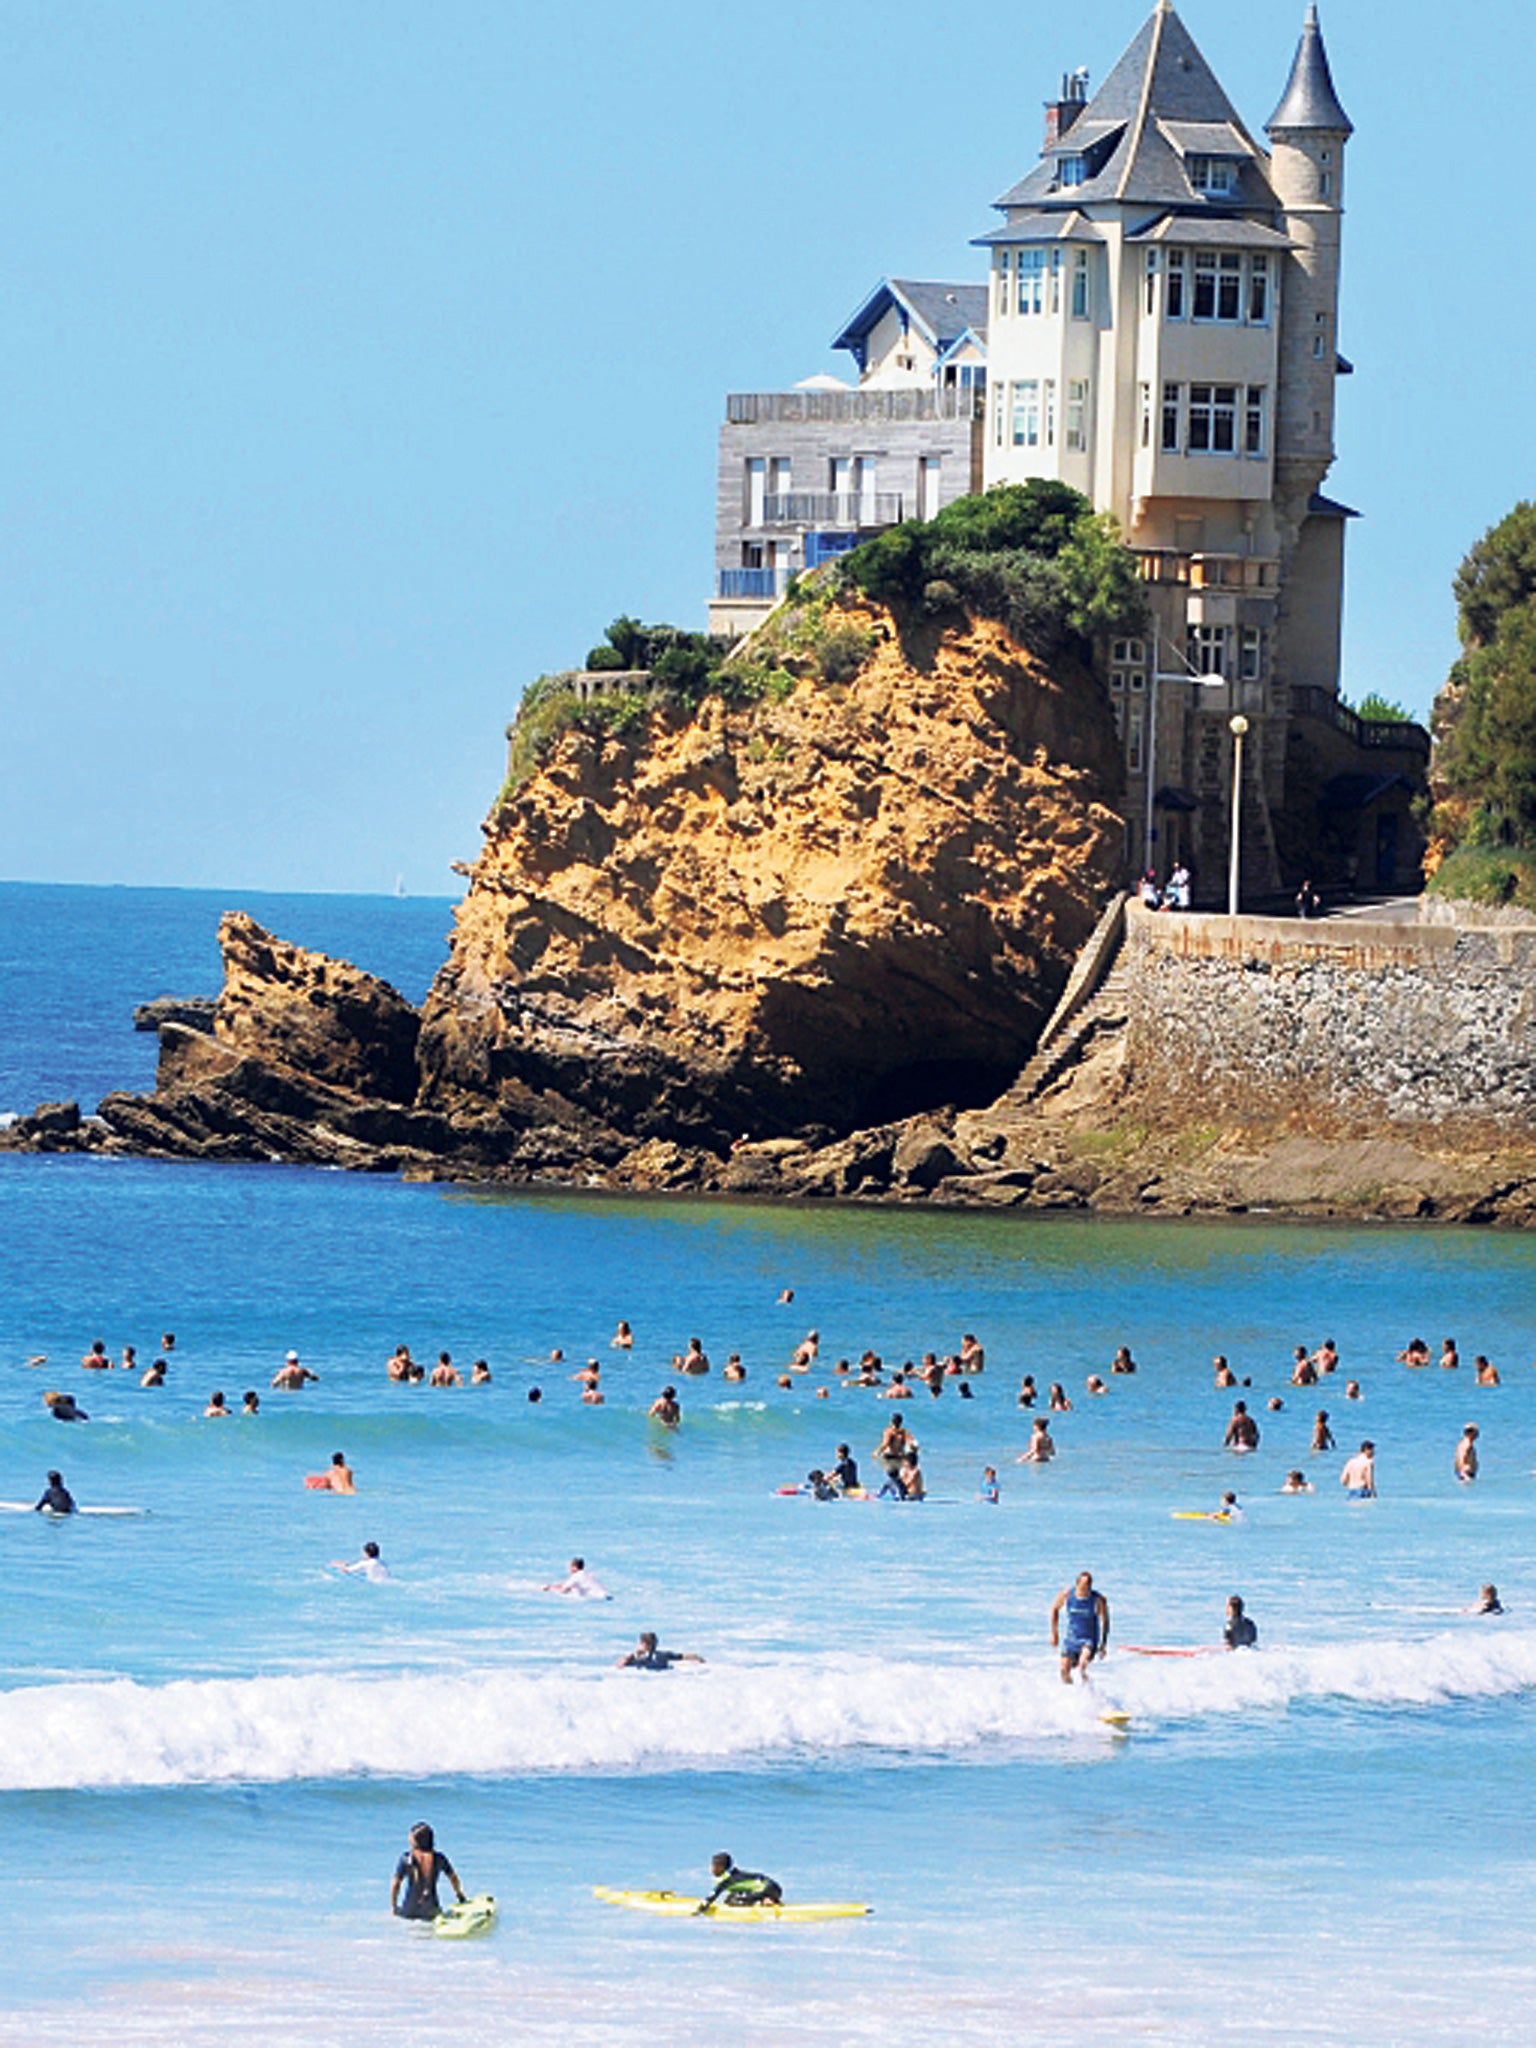 Lap it up: holidaymakers take to the water in Biarritz